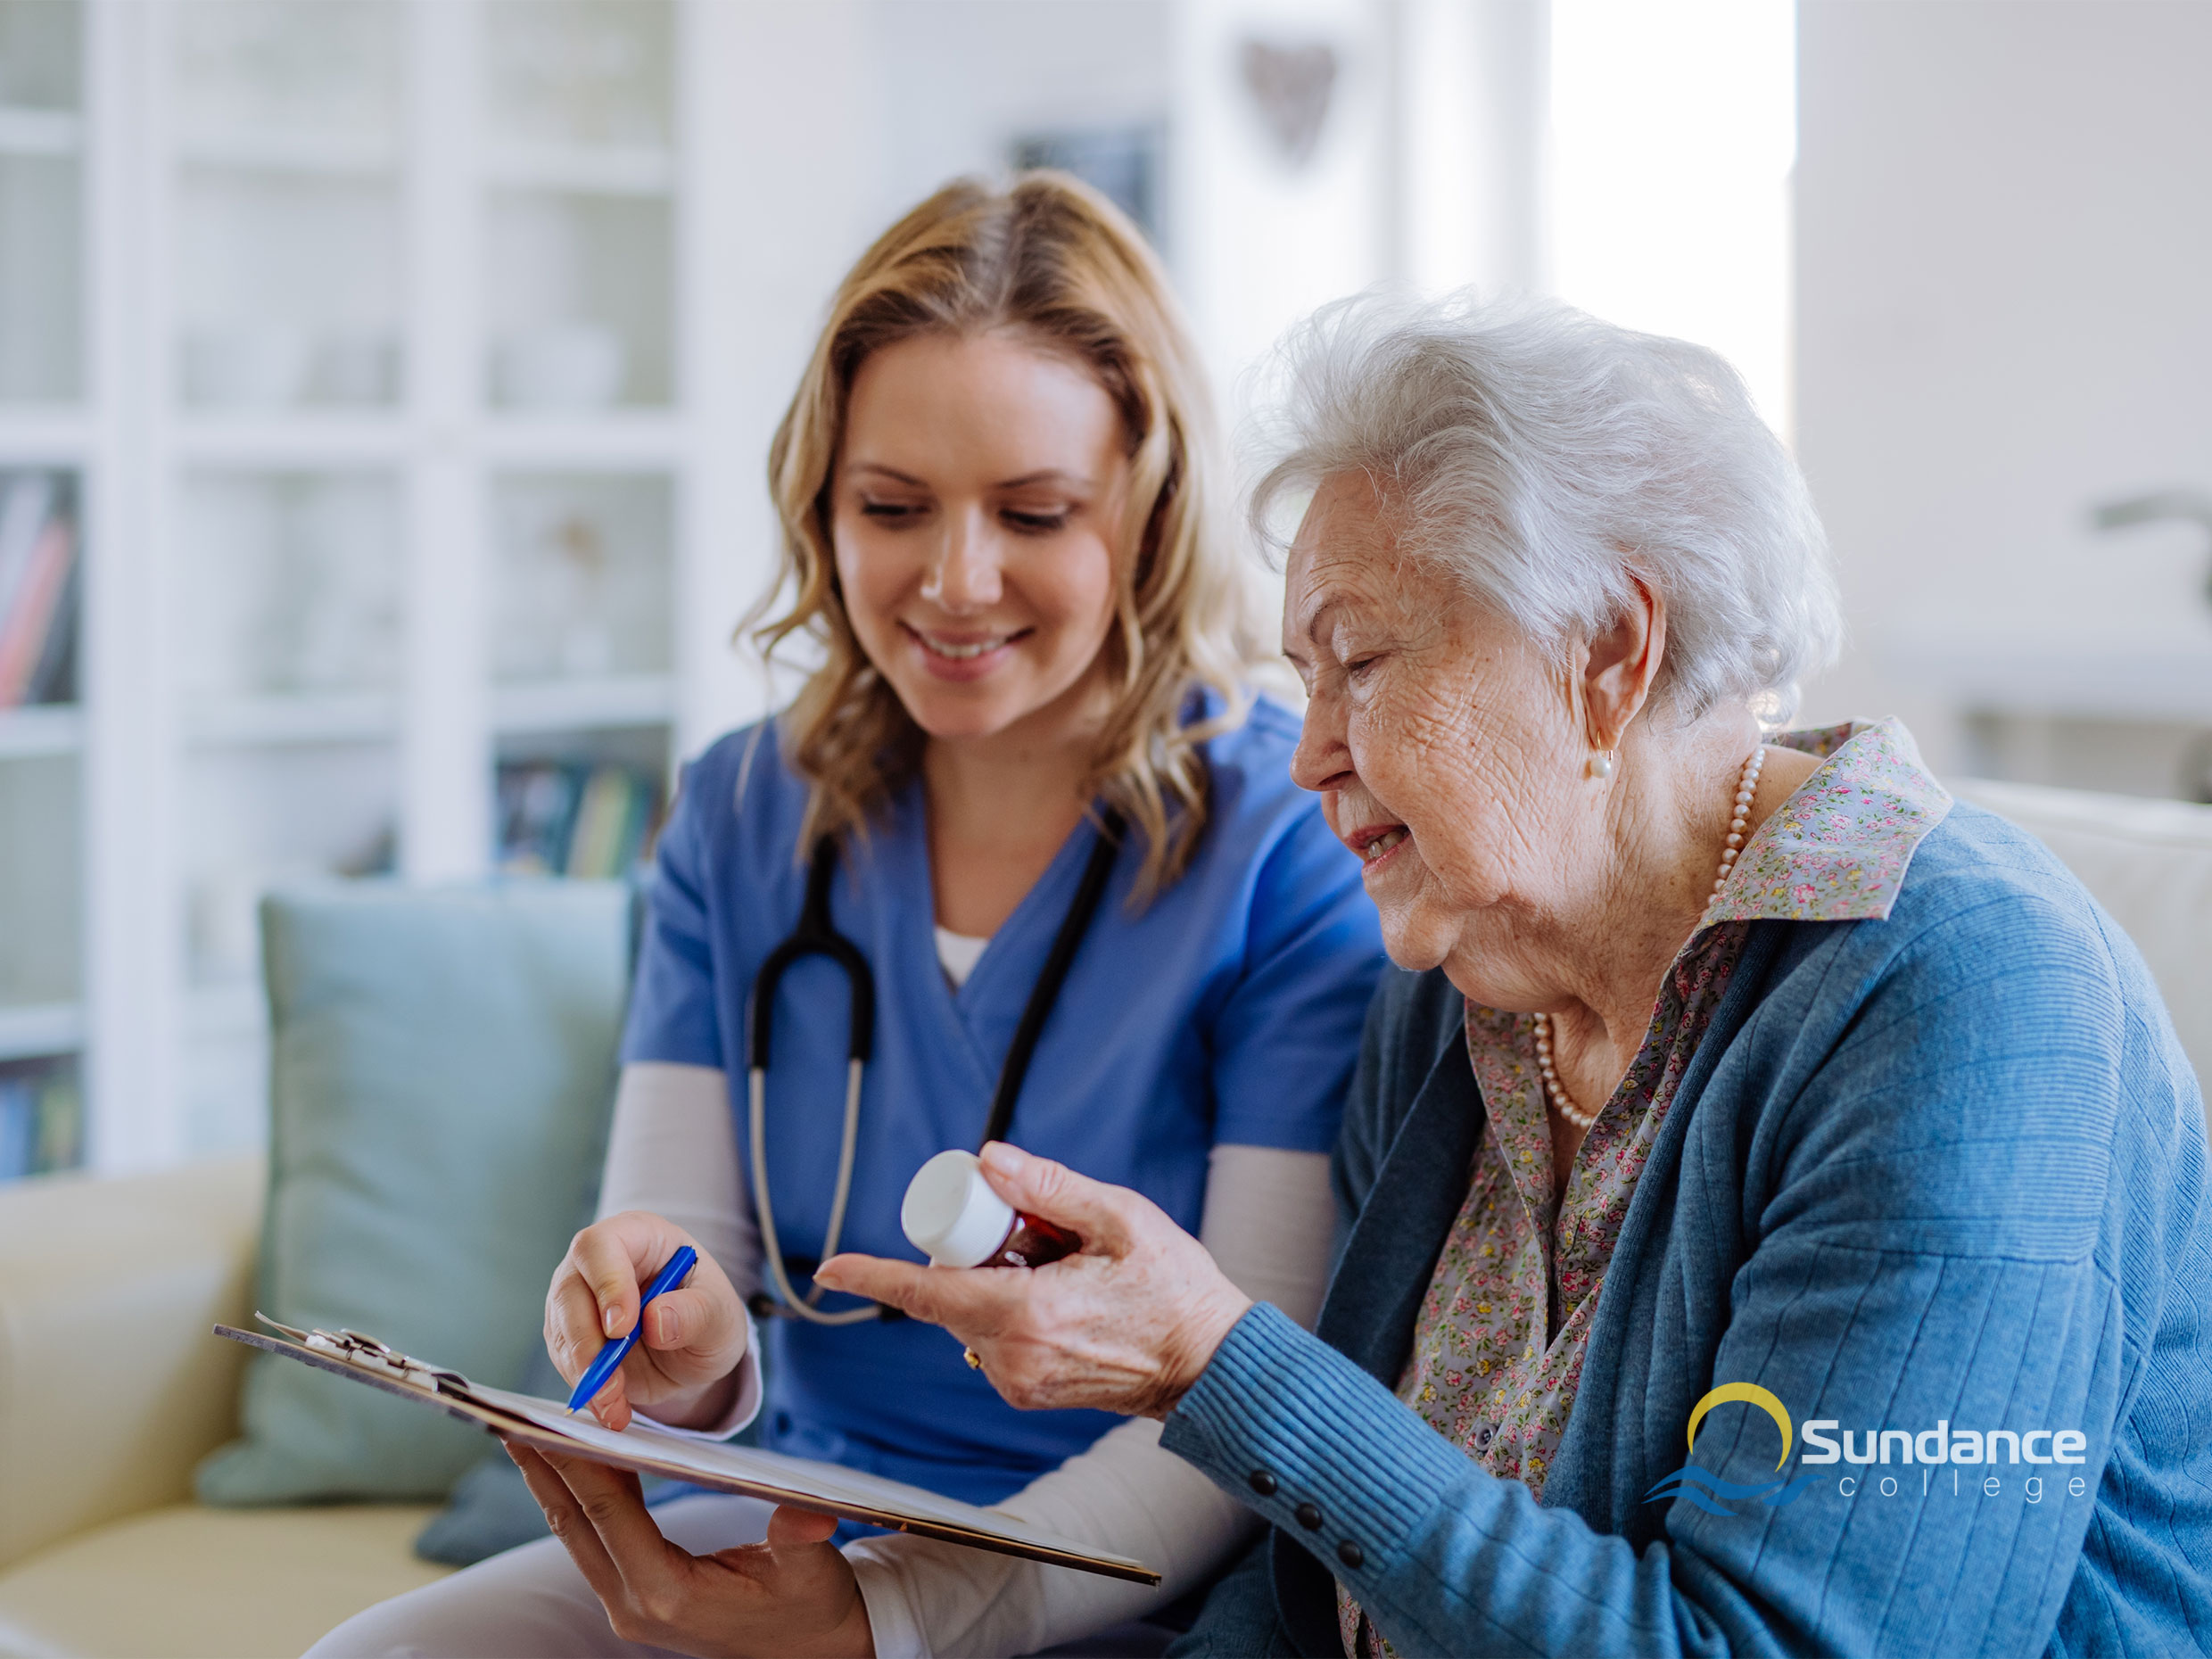 A care aide helping patient understand their medication schedule